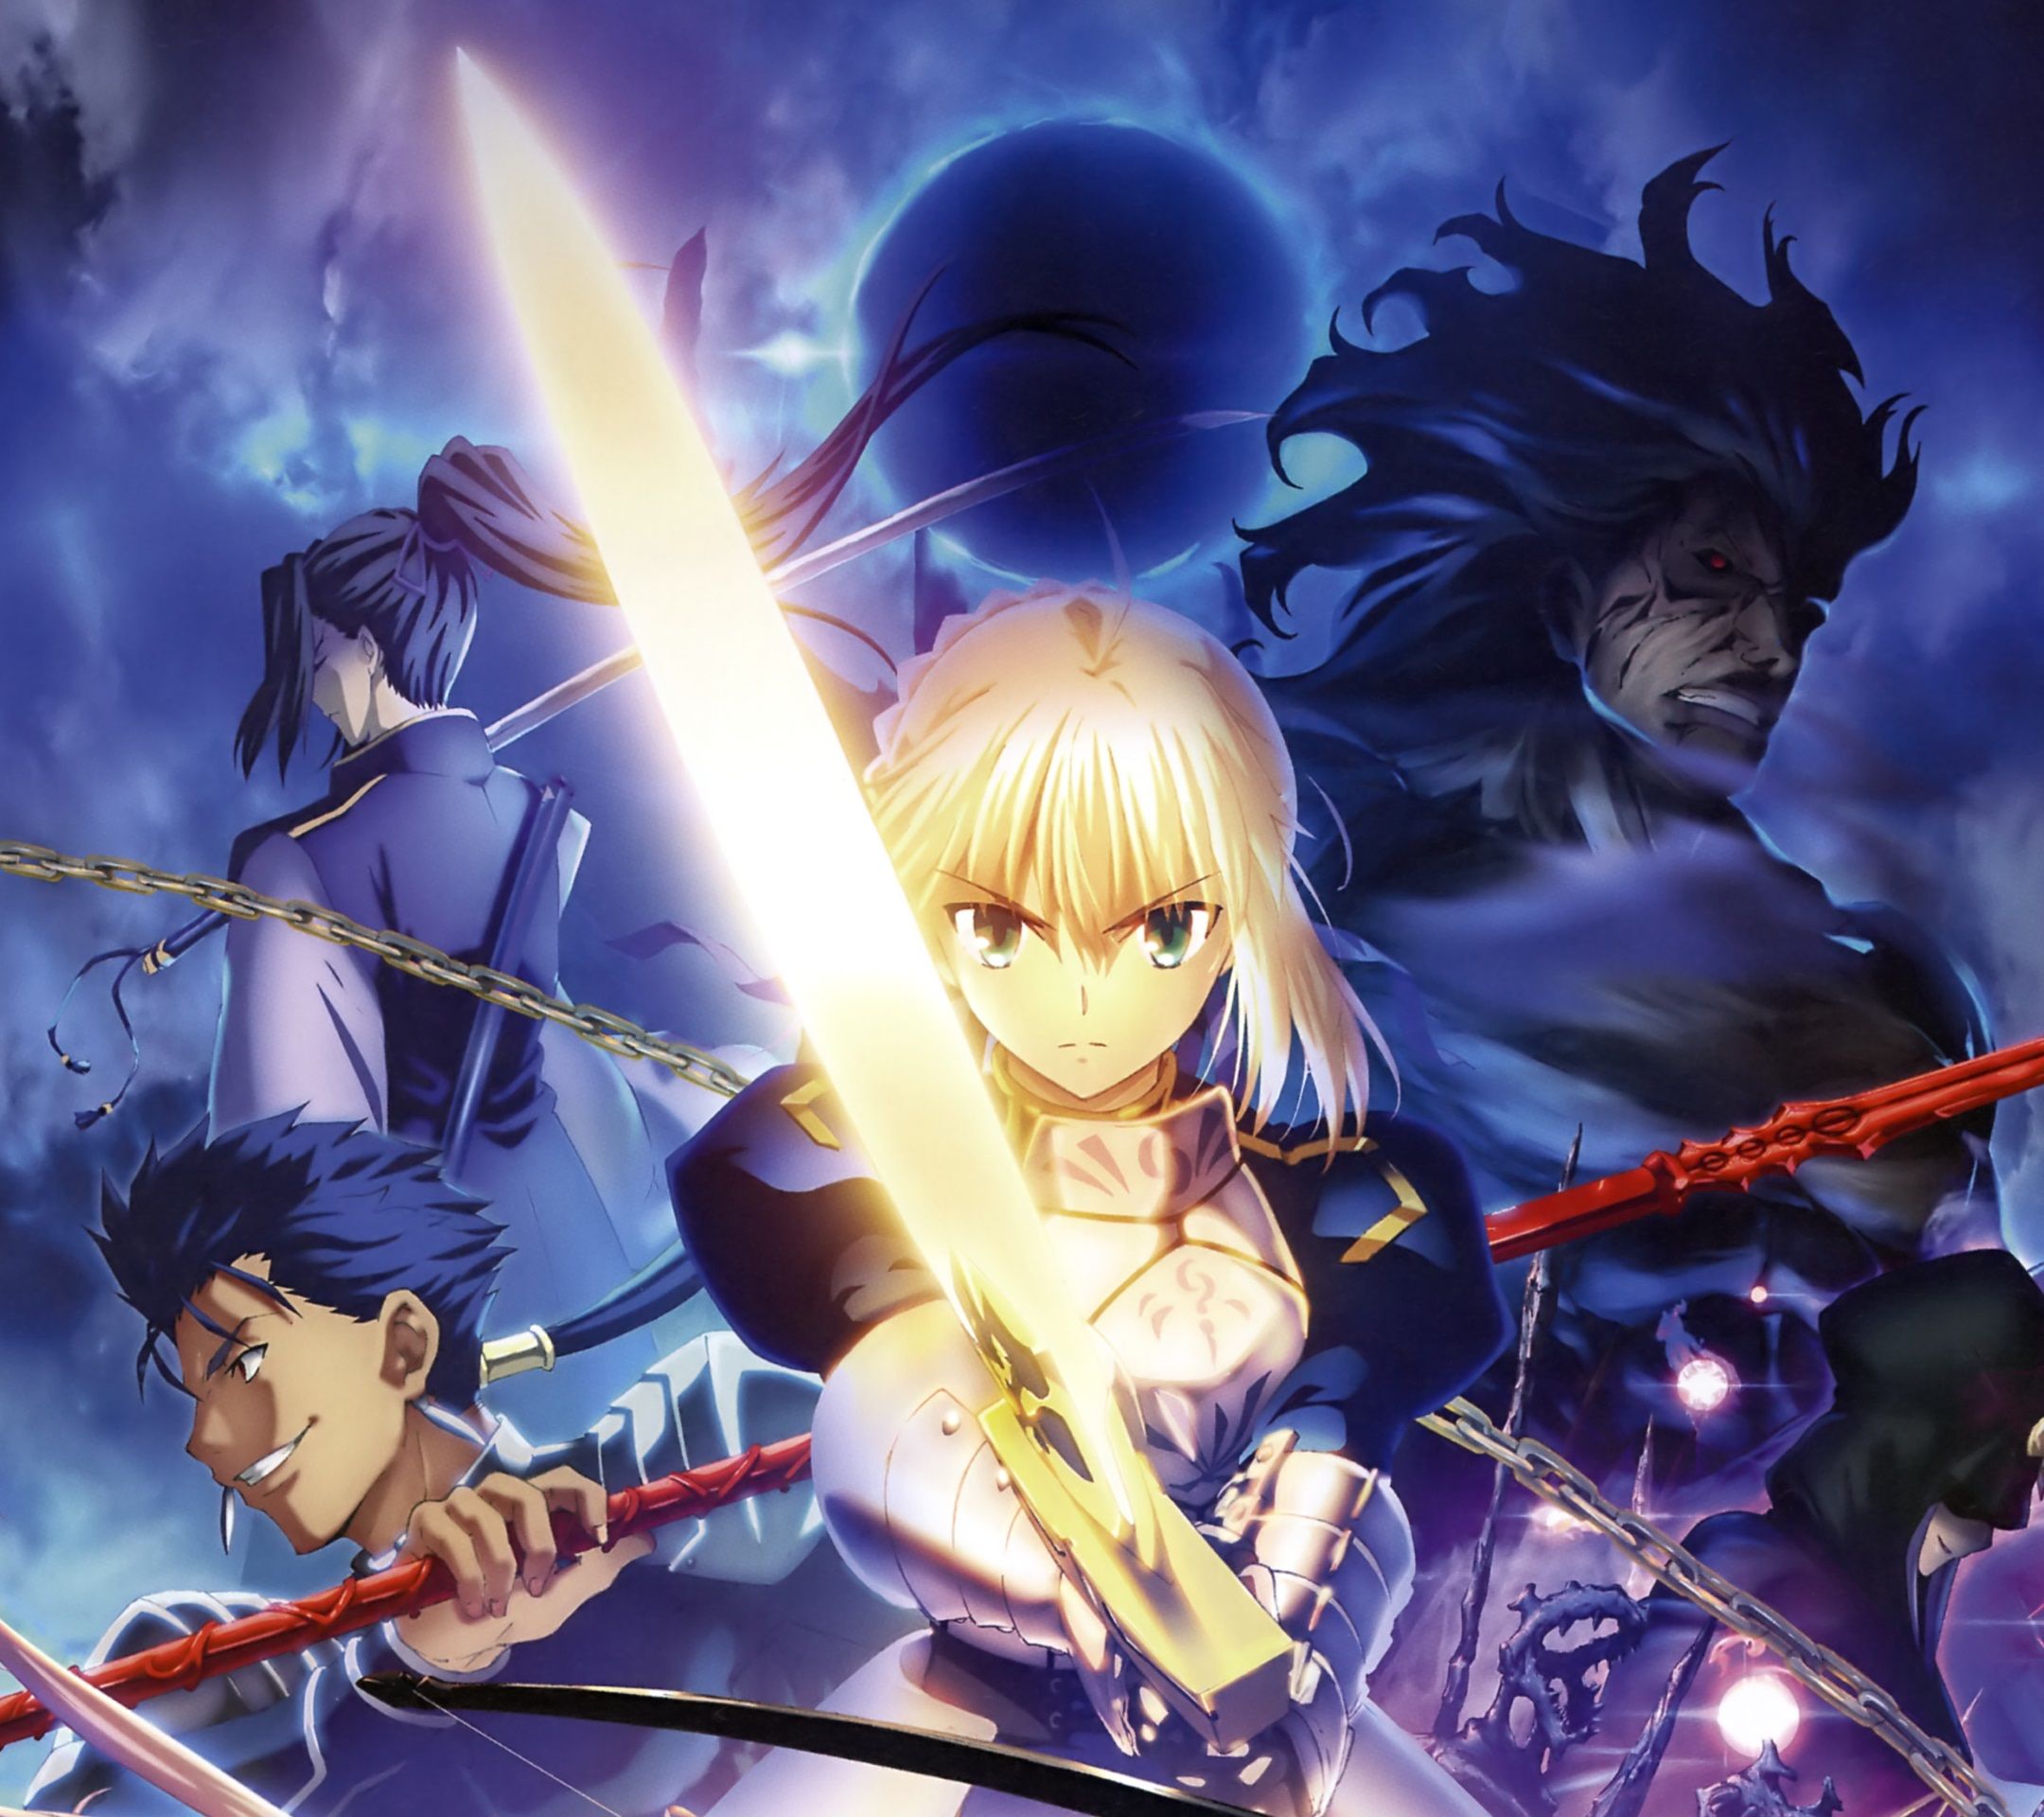 Saber Anime Wallpaper Android Anime wallpaper list containing 150